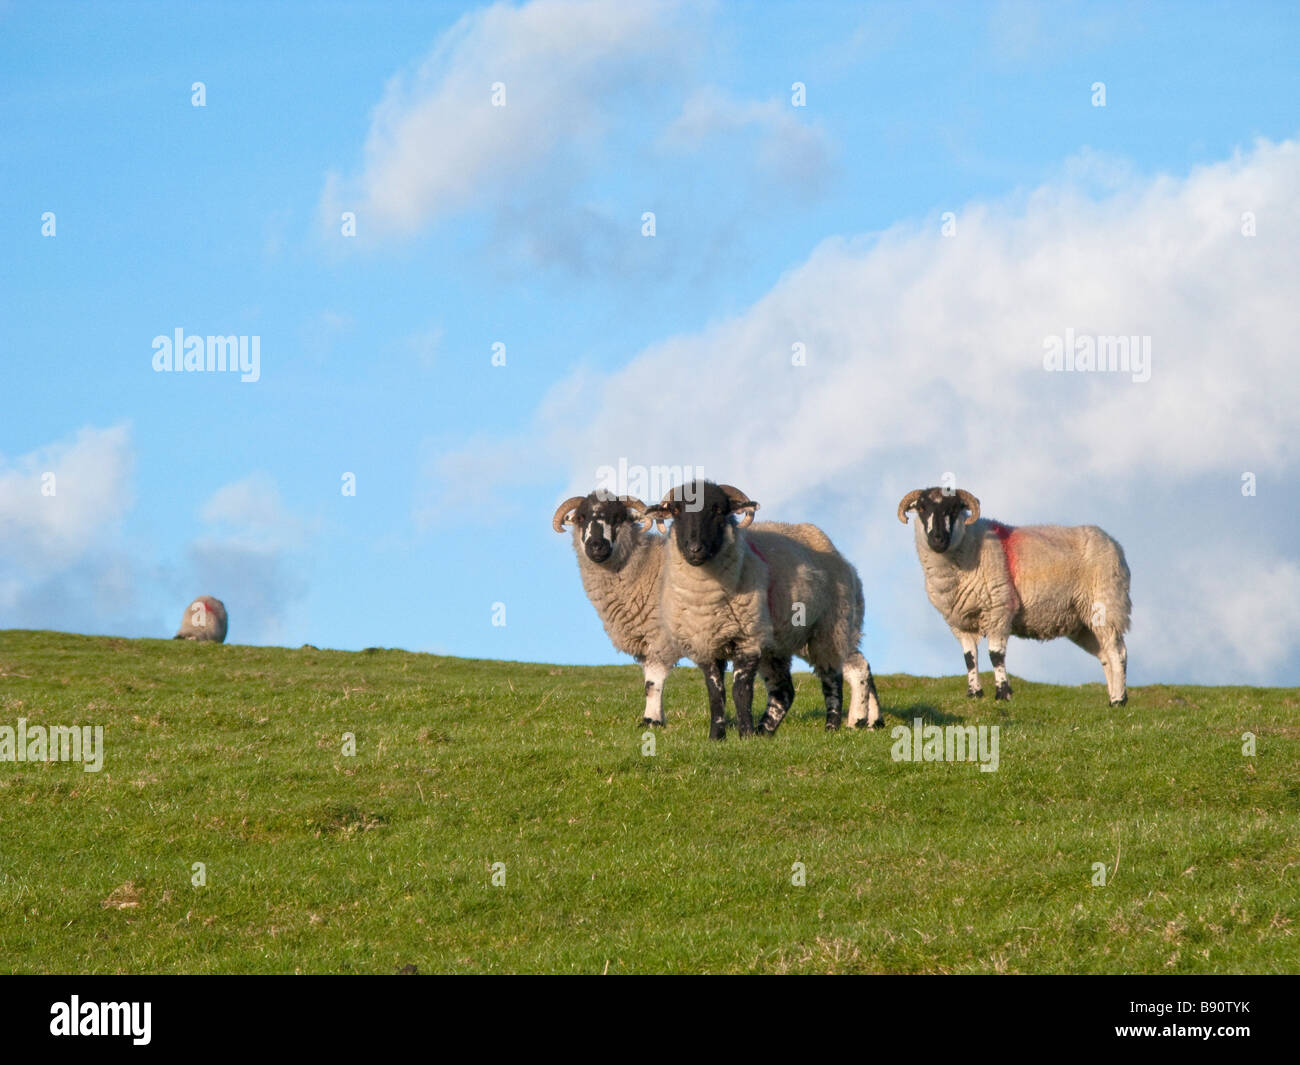 3 sheep in a field Stock Photo